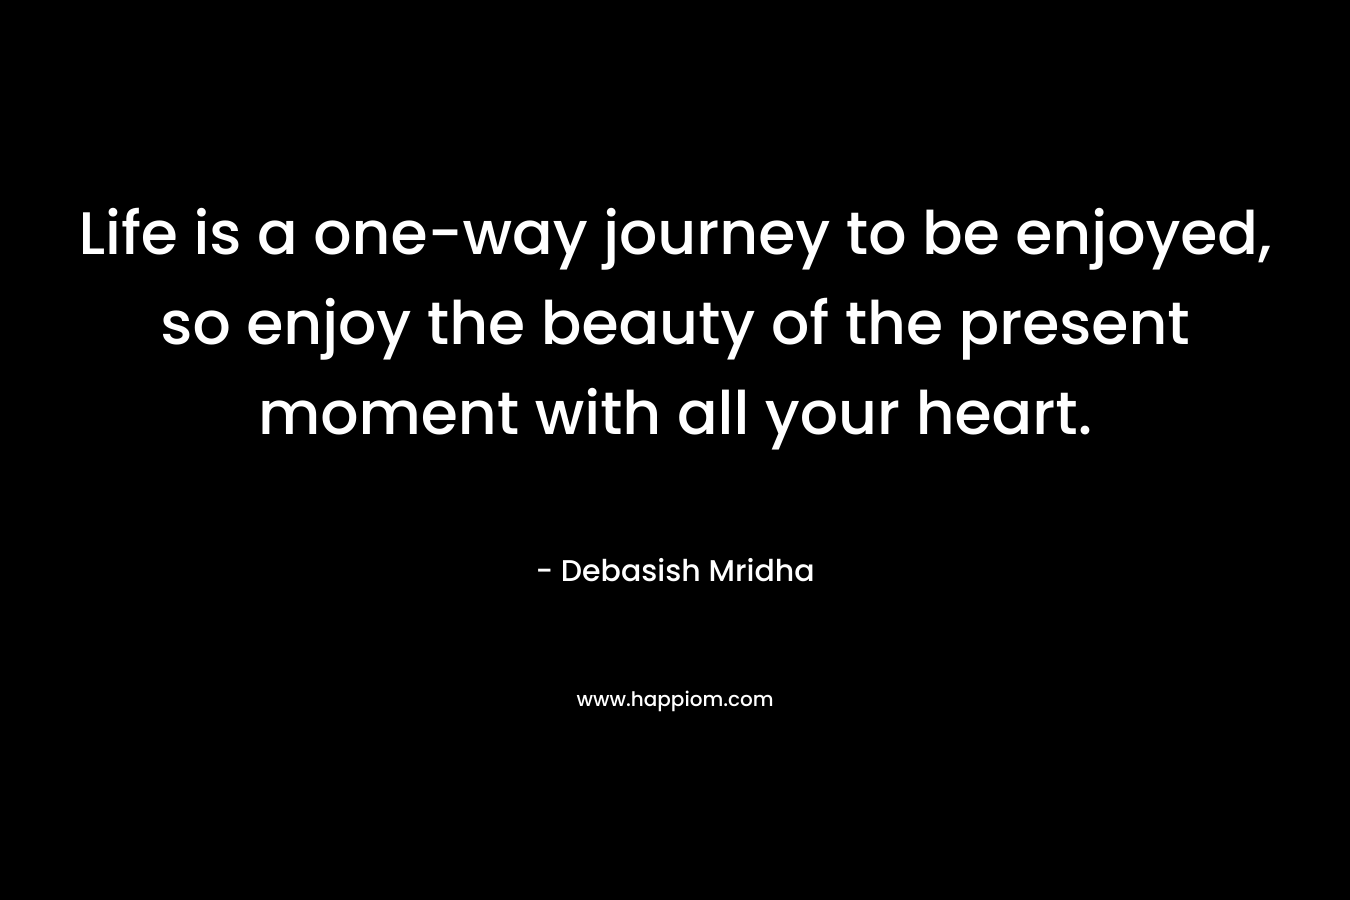 Life is a one-way journey to be enjoyed, so enjoy the beauty of the present moment with all your heart.